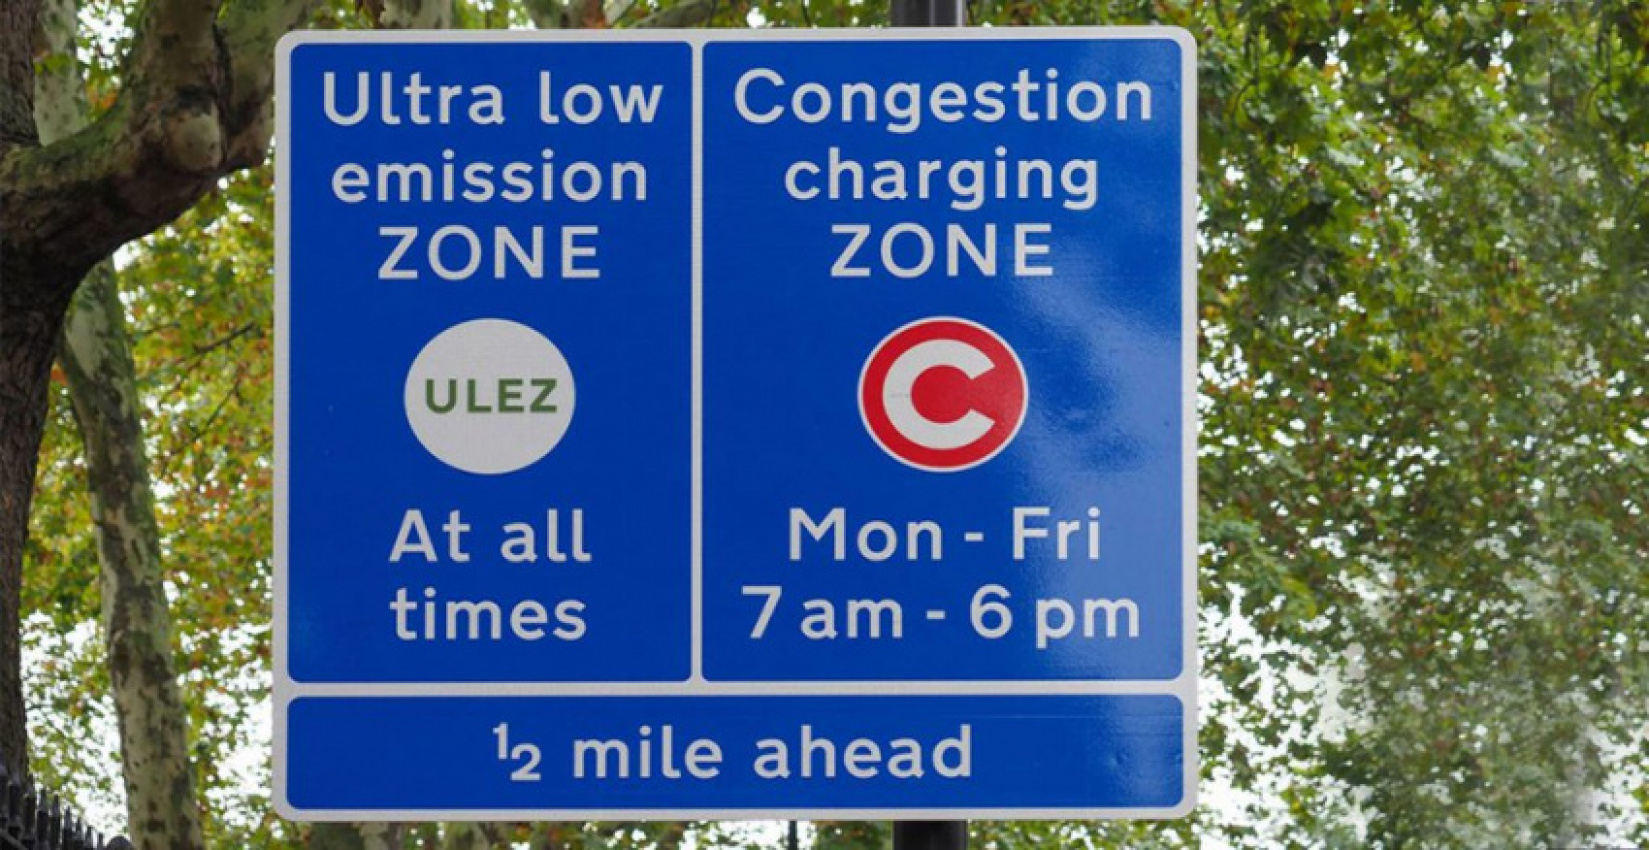 autos, cars, electric mobility, mobility, microsoft, vnex, can low emissions zones effectively regulate traffic in cities? 